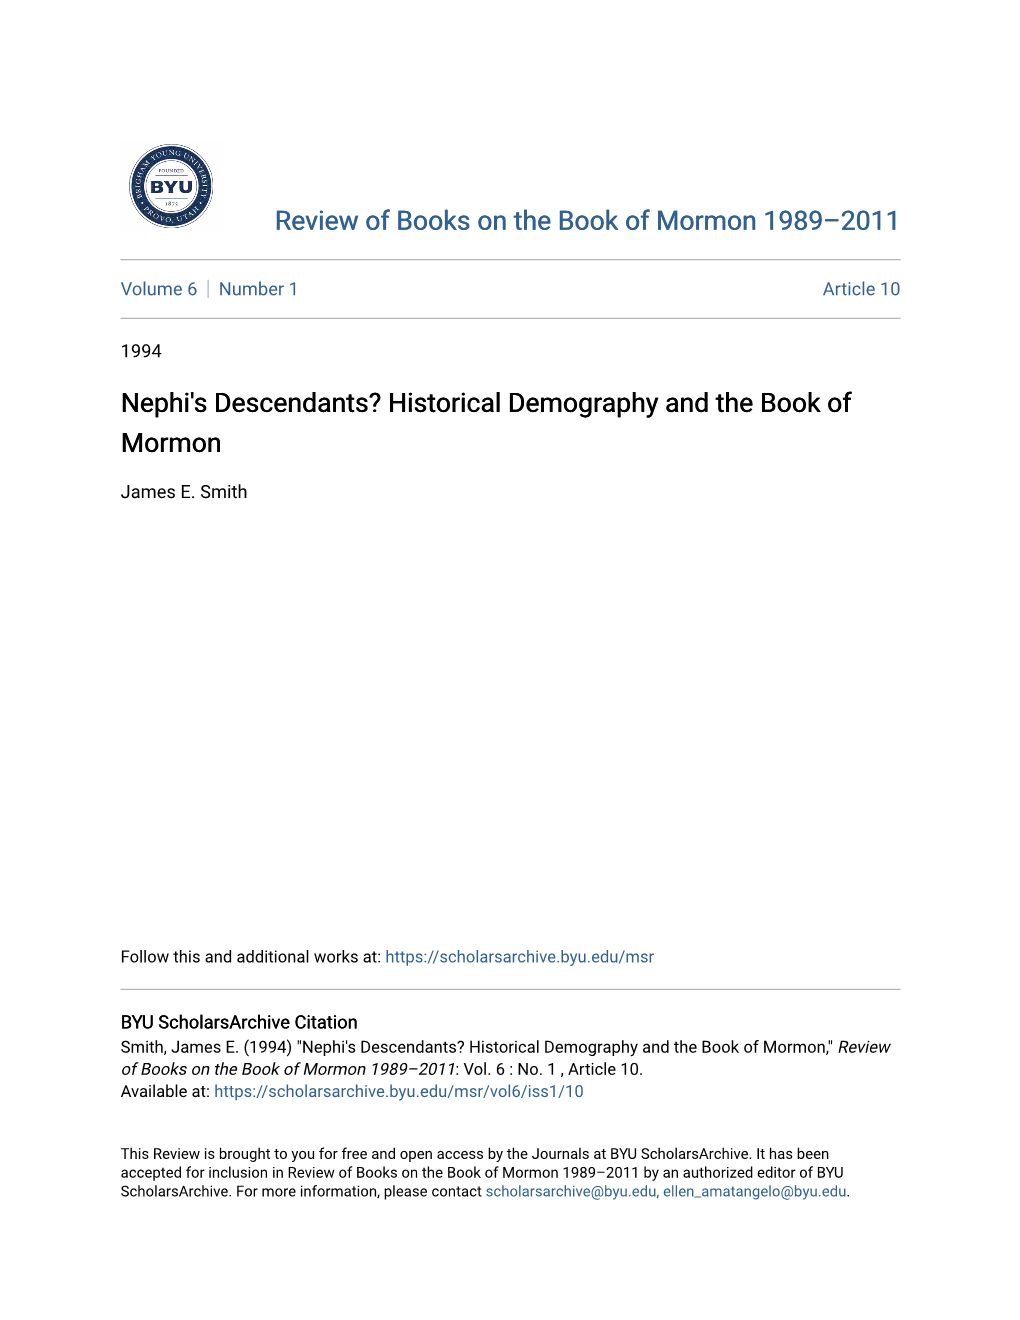 Nephi's Descendants? Historical Demography and the Book of Mormon